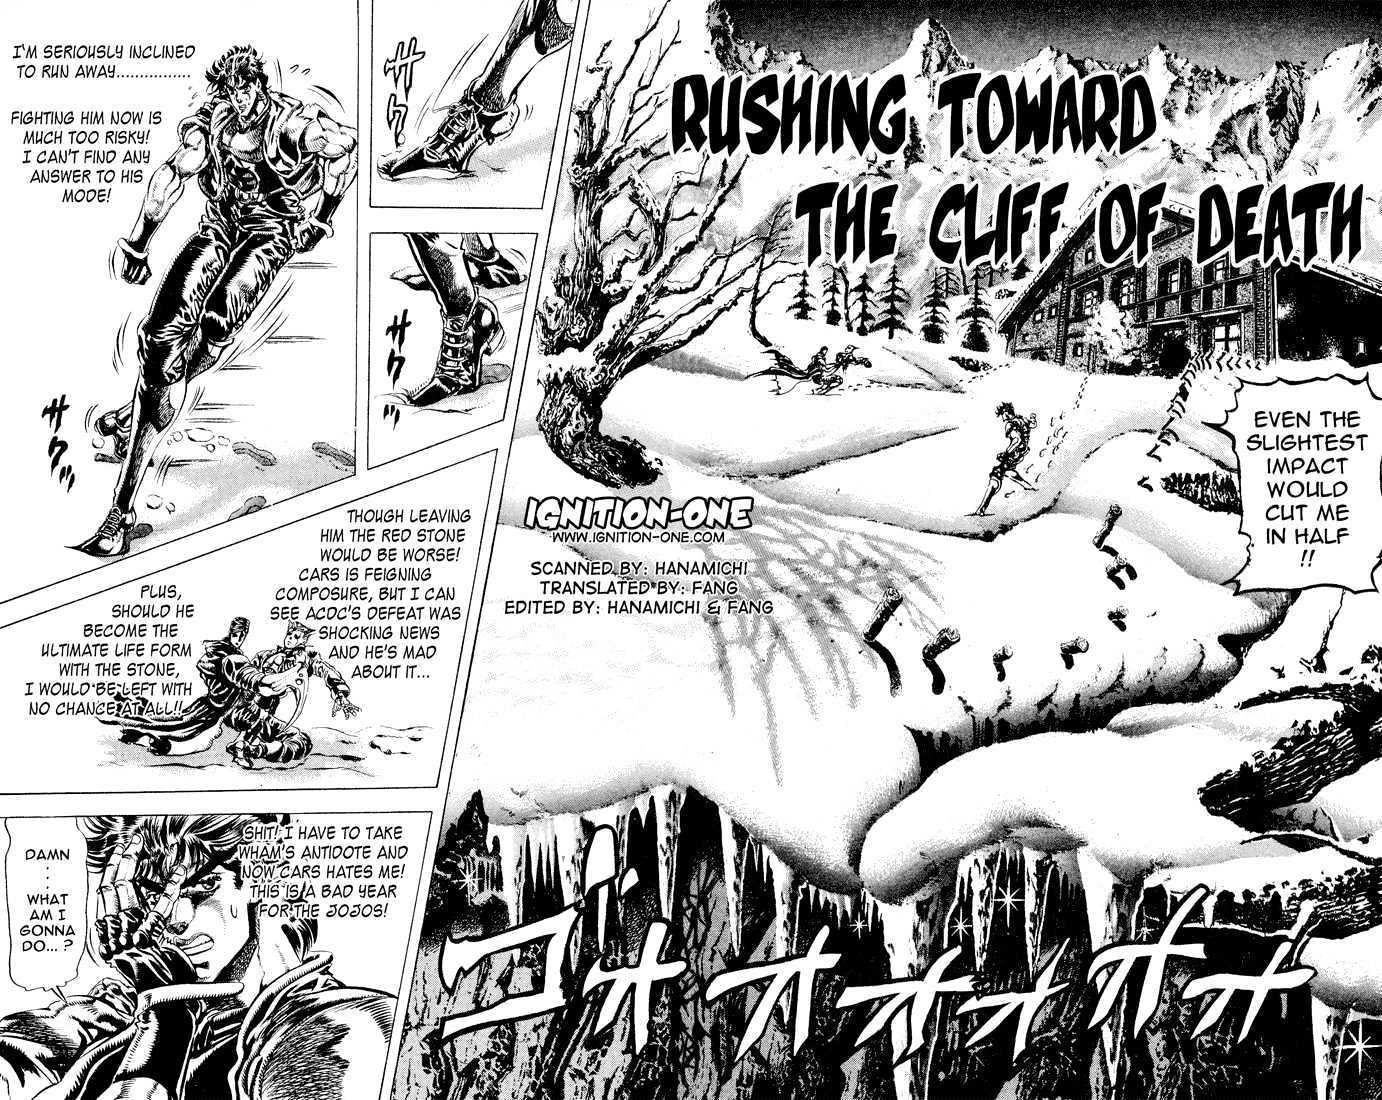 Jojo's Bizarre Adventure Vol.9 Chapter 86 : Rushing Toward The Cliff Of Death page 2 - 